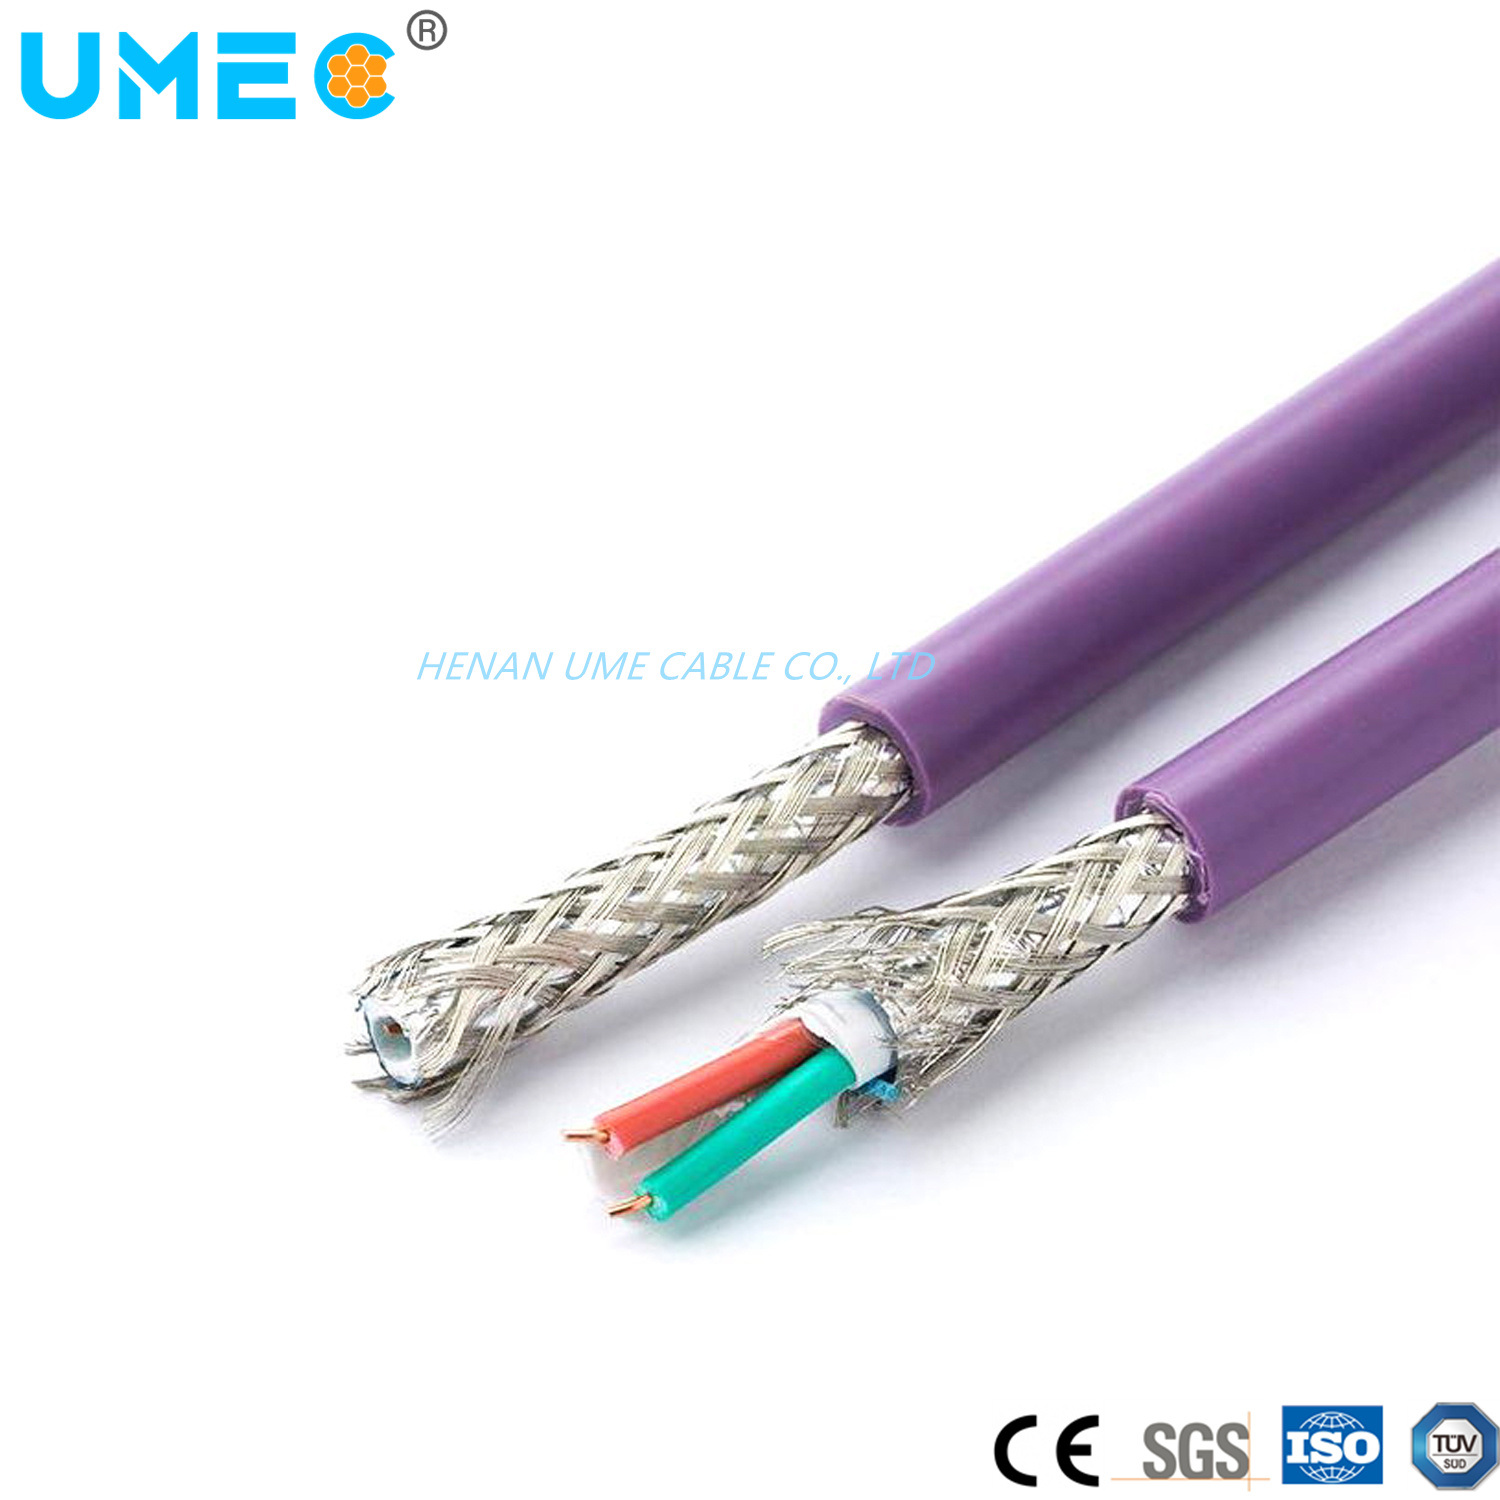 LV Communication Cable Silicon-Free China LV Dp Bus Violet 6xv1830-0eh10 Cable Manufacturers & Suppliers